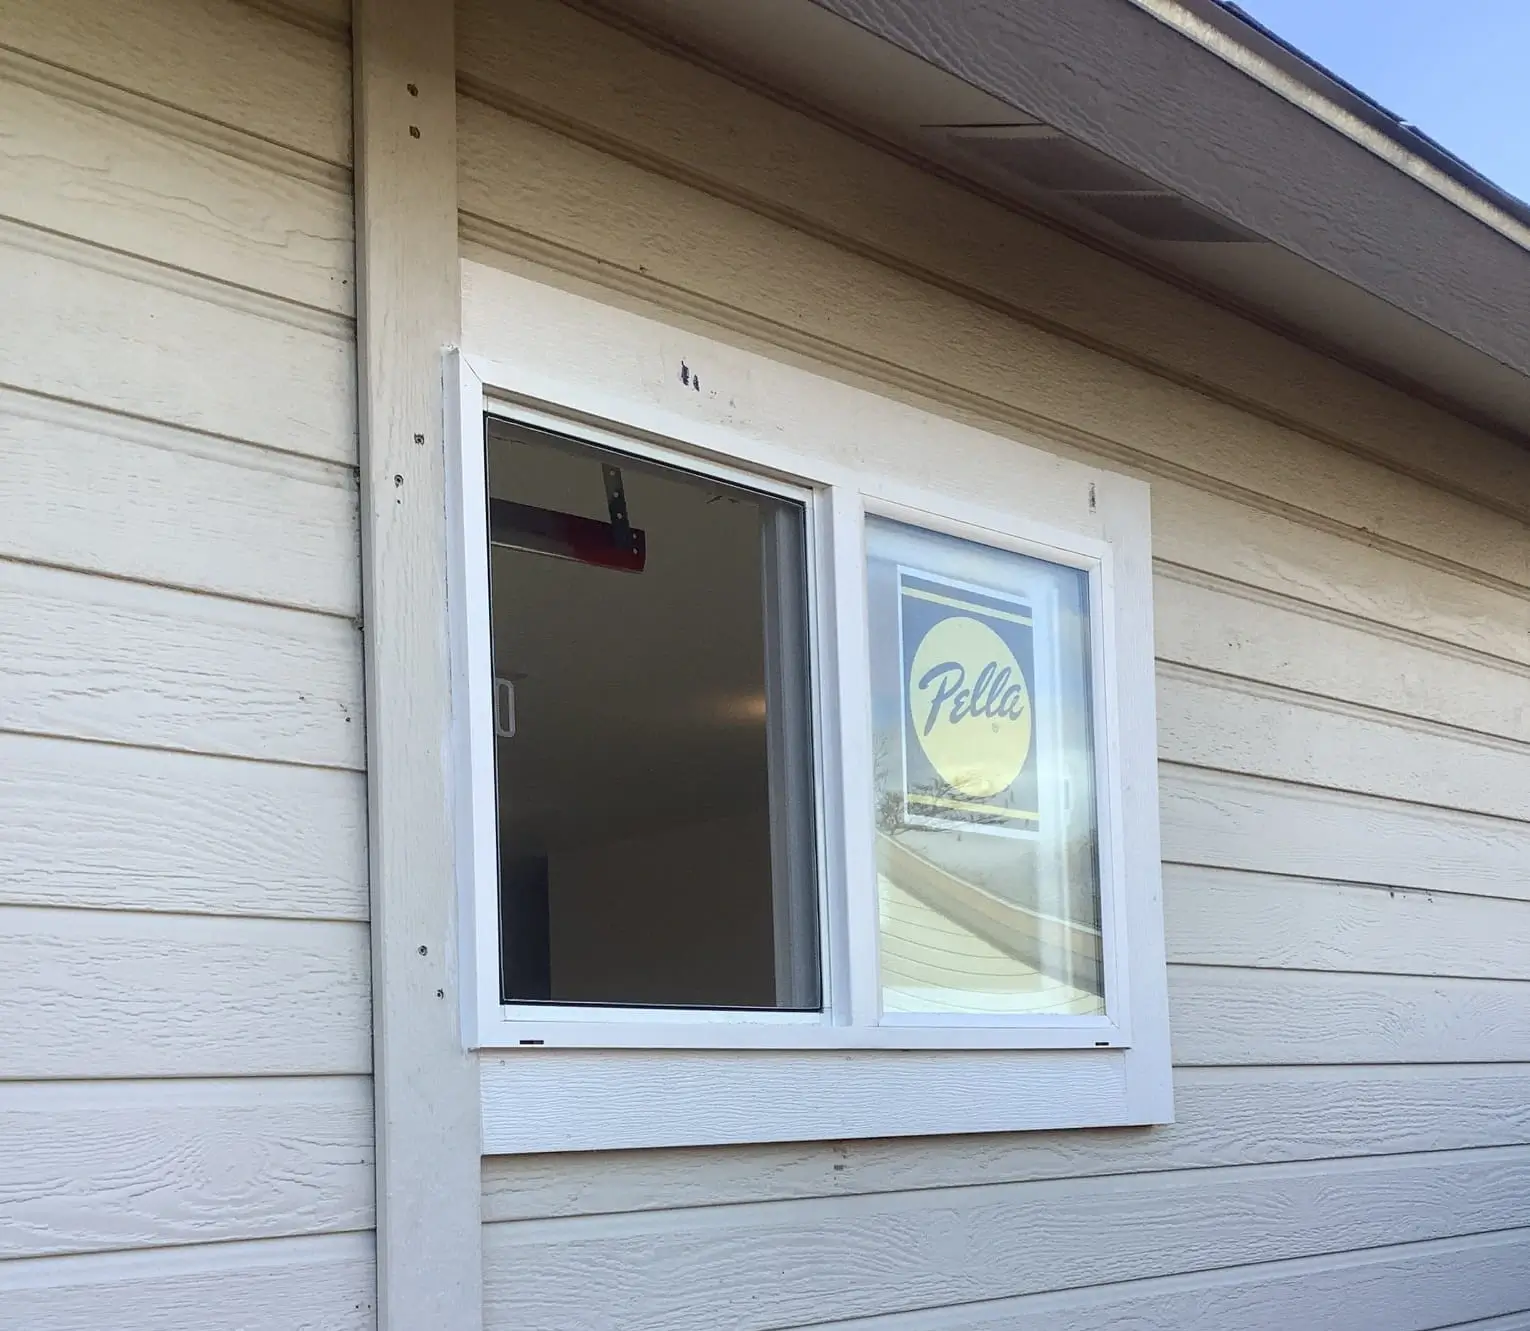 A newly installed window on the side of a house. The window has a Pella brand sticker on it.